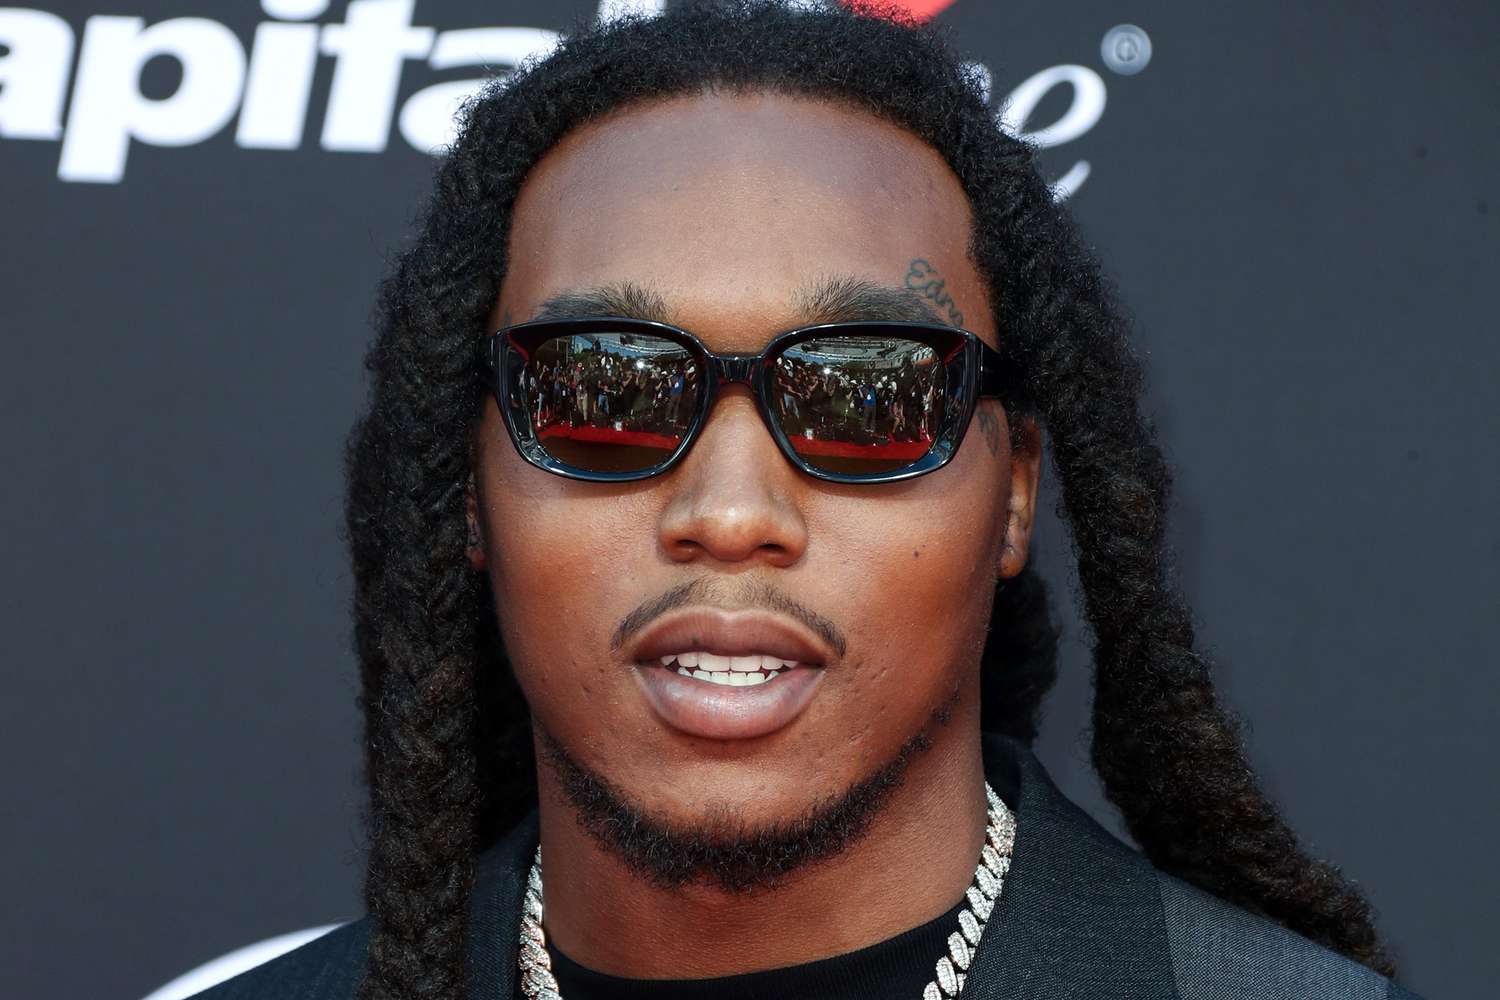 Migos Rapper Takeoff's Cause of Death Released